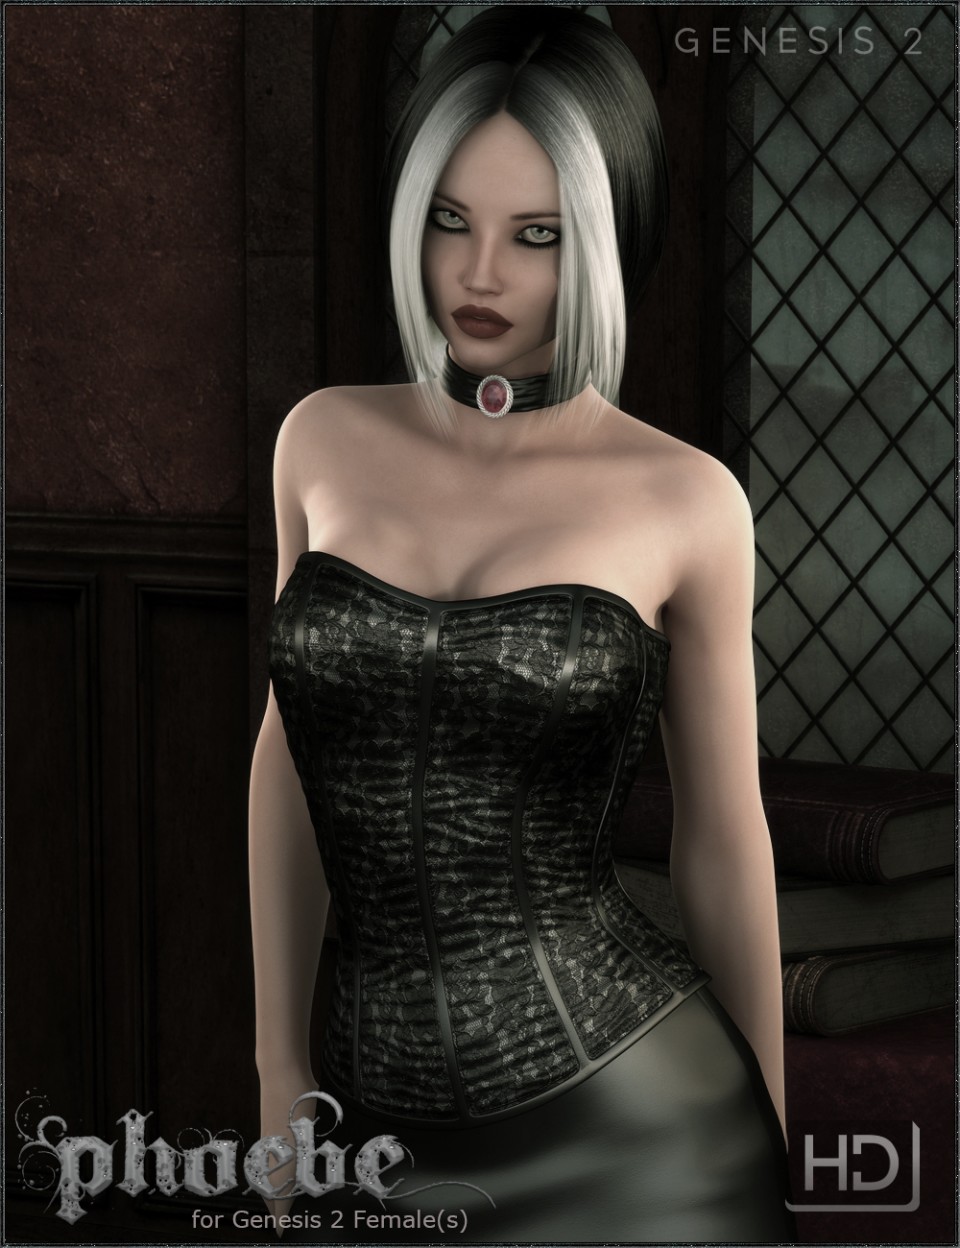 Phoebe HD Bundle – Gothic Character, Outfit and Hair